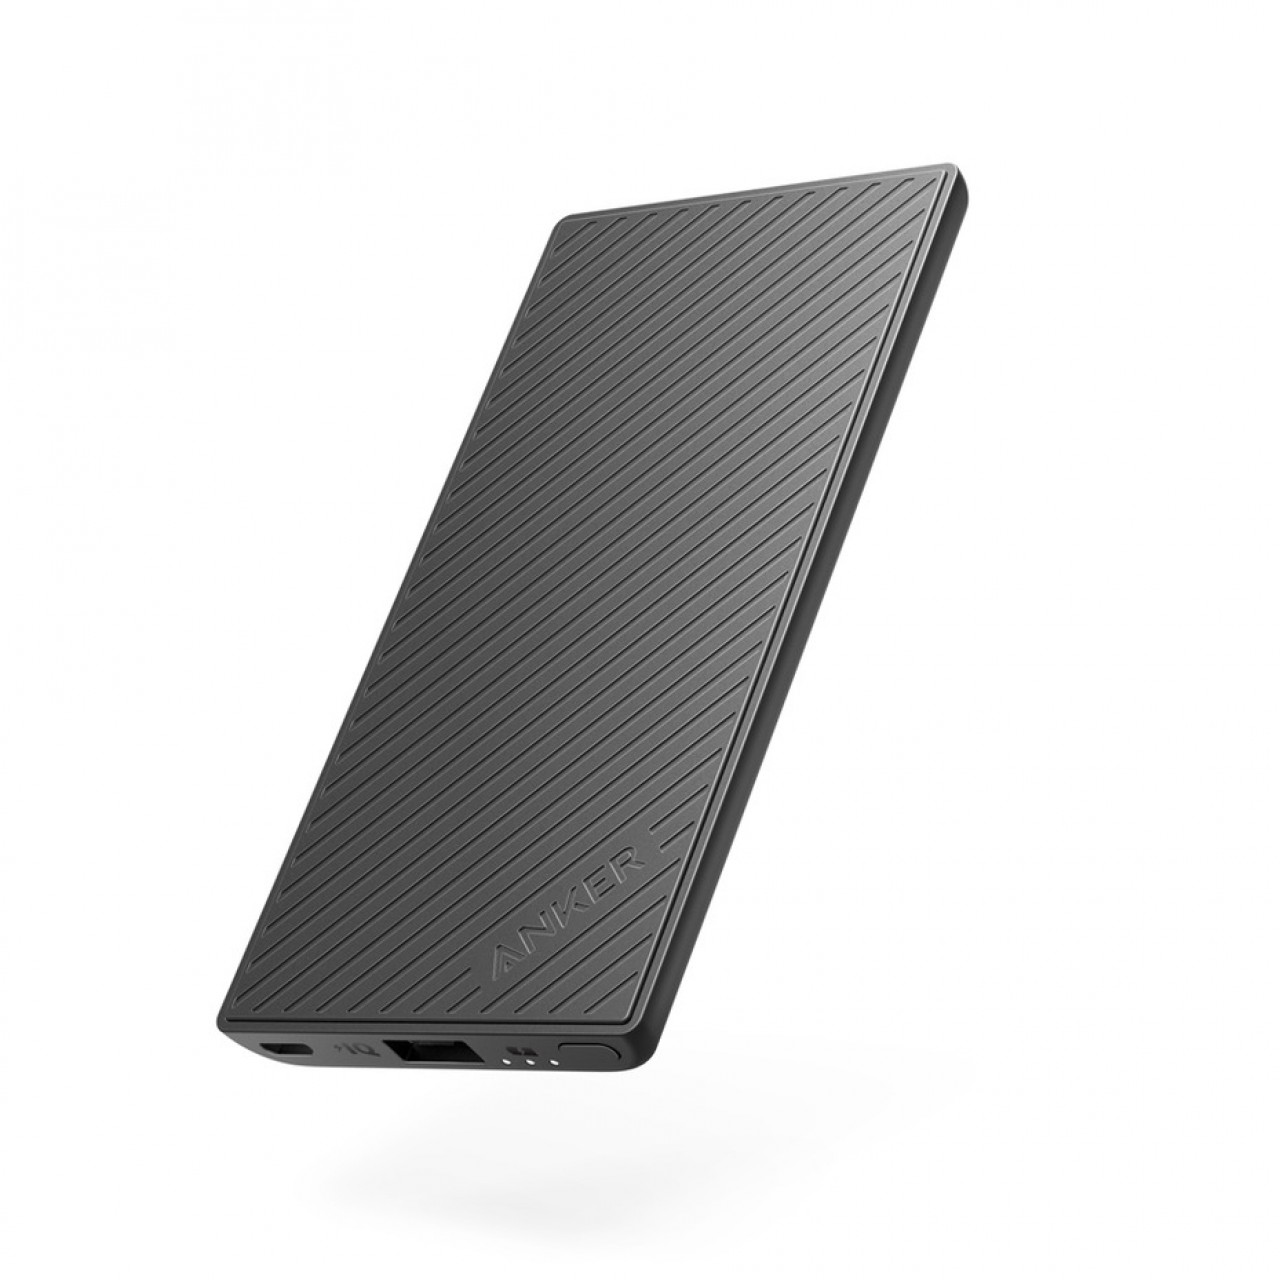 Anker Portable Ultra Slim Power Bank 5000 mAh - The Ultra Compact Portable Charger Core